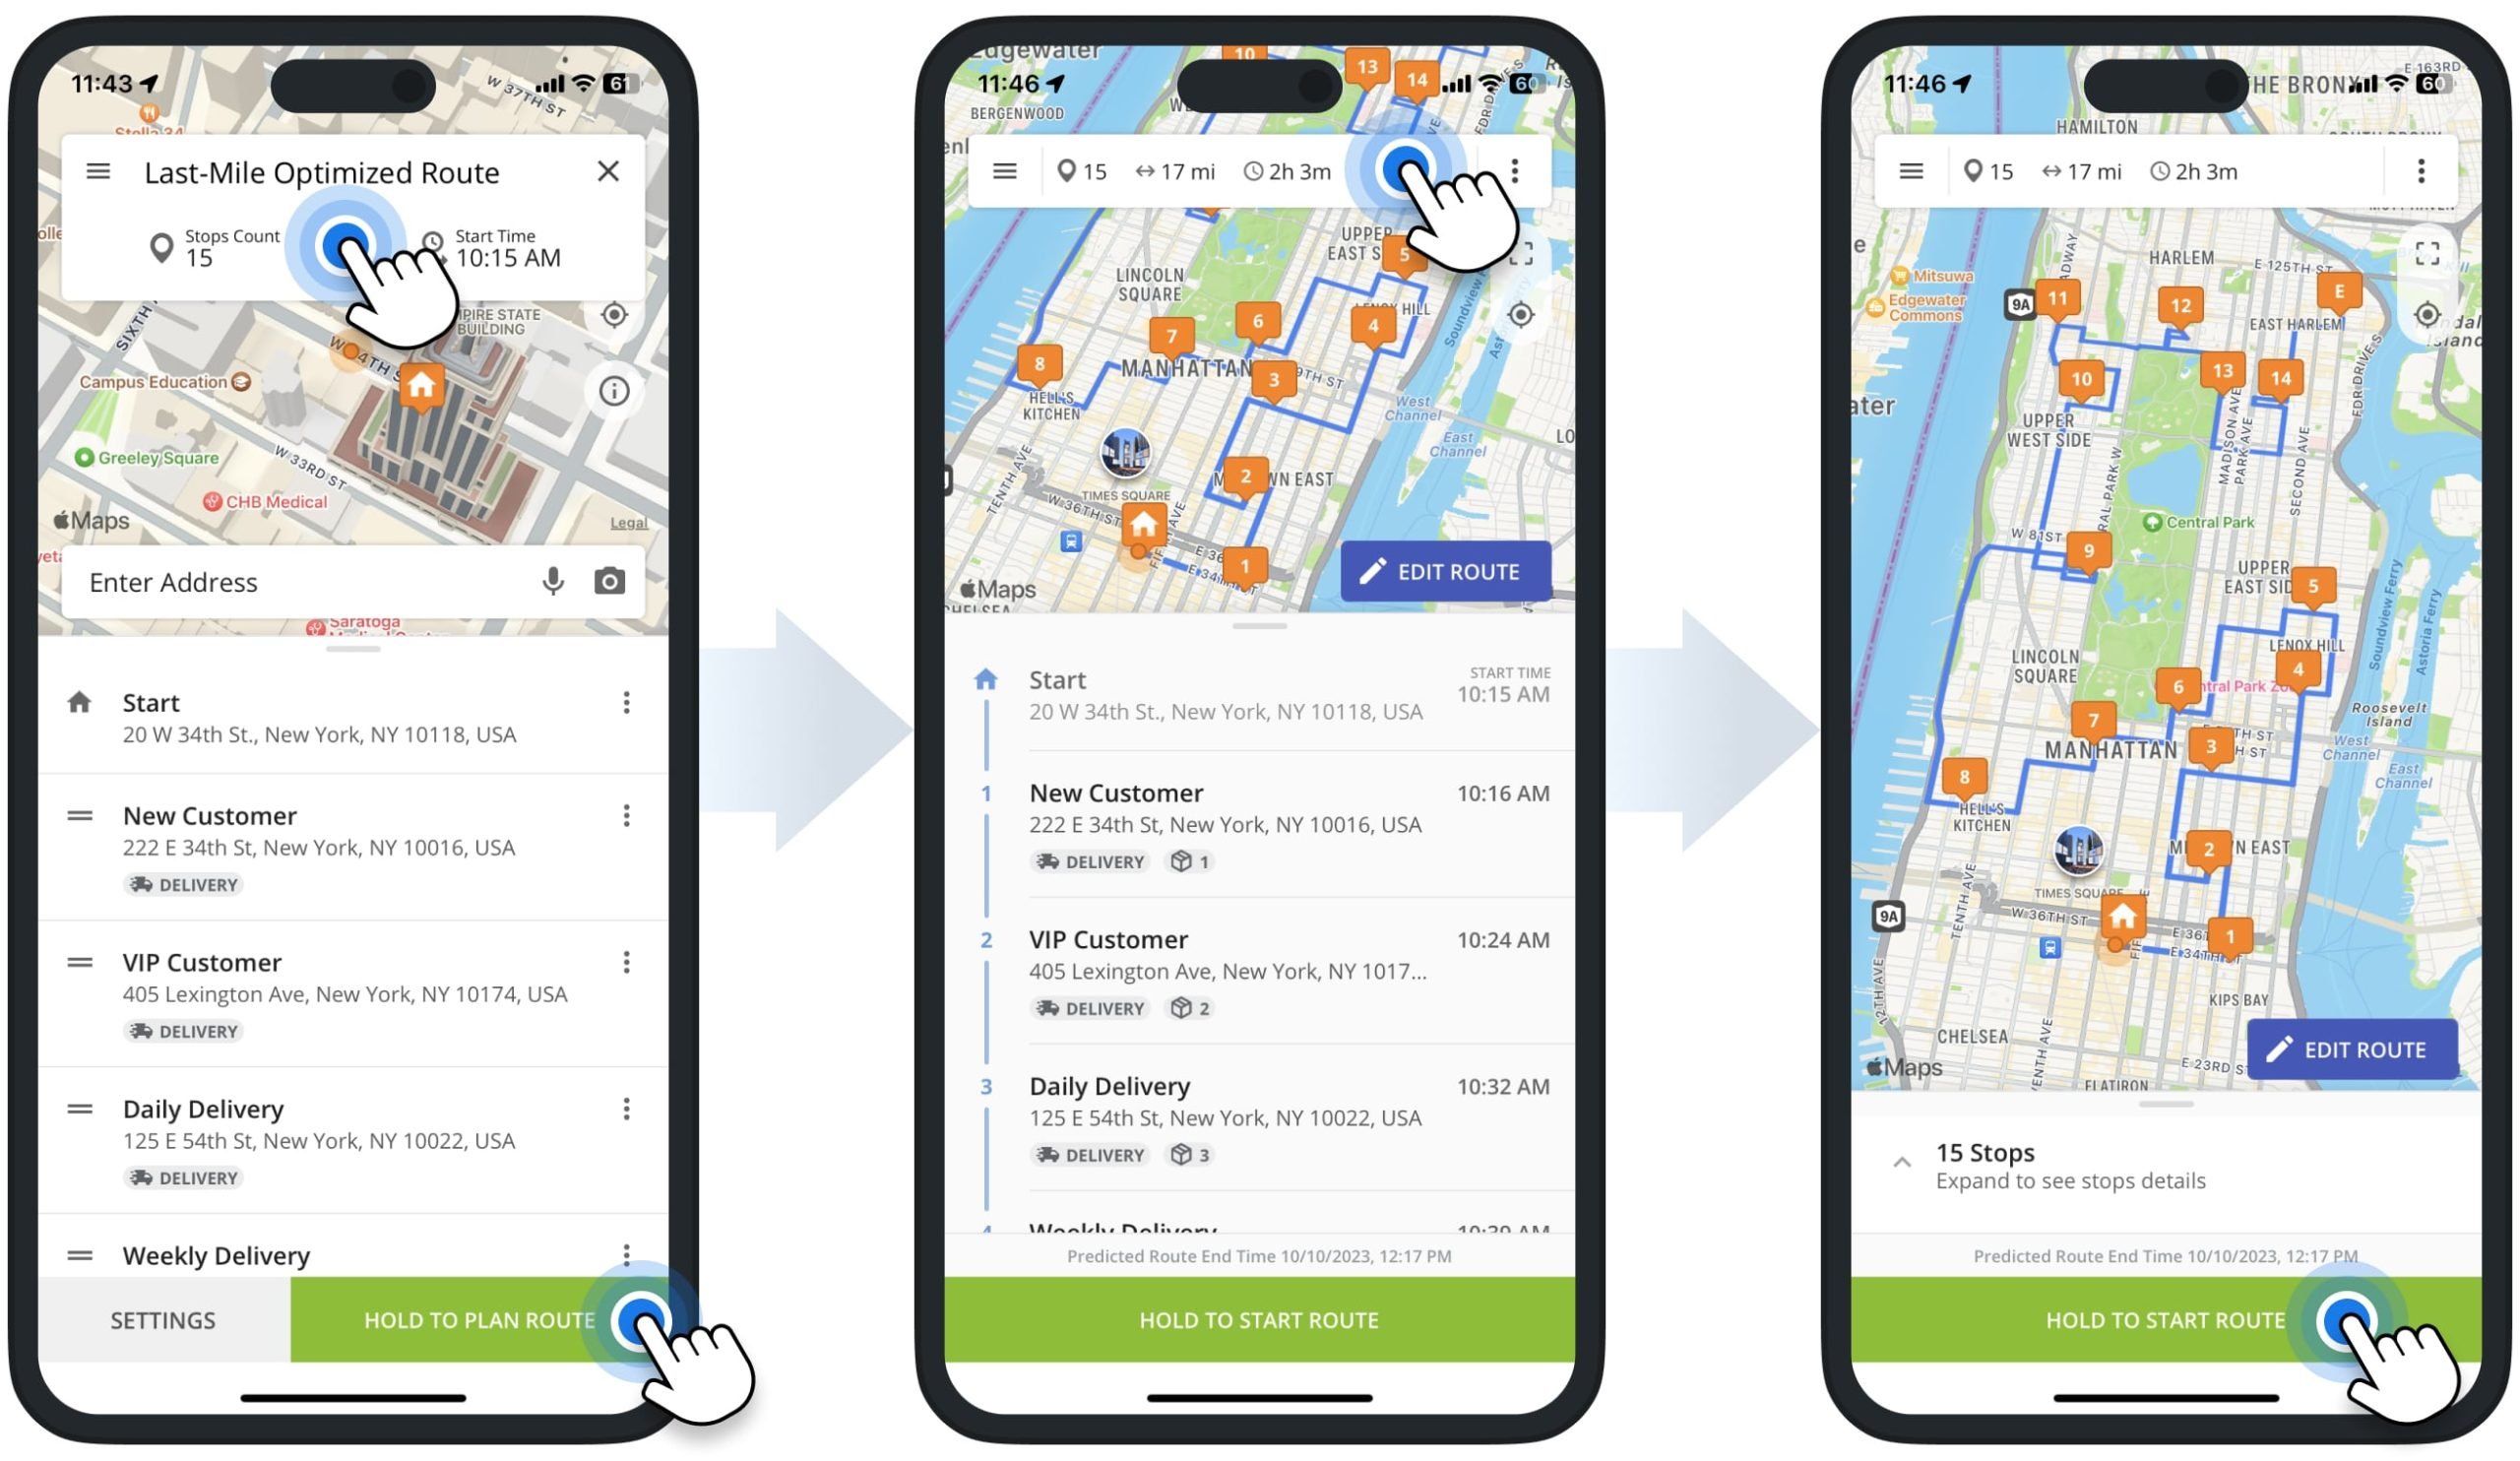 Optimizing multi-address route and sequencing multiple stops on Route4Me's iPhone Route Planning app.